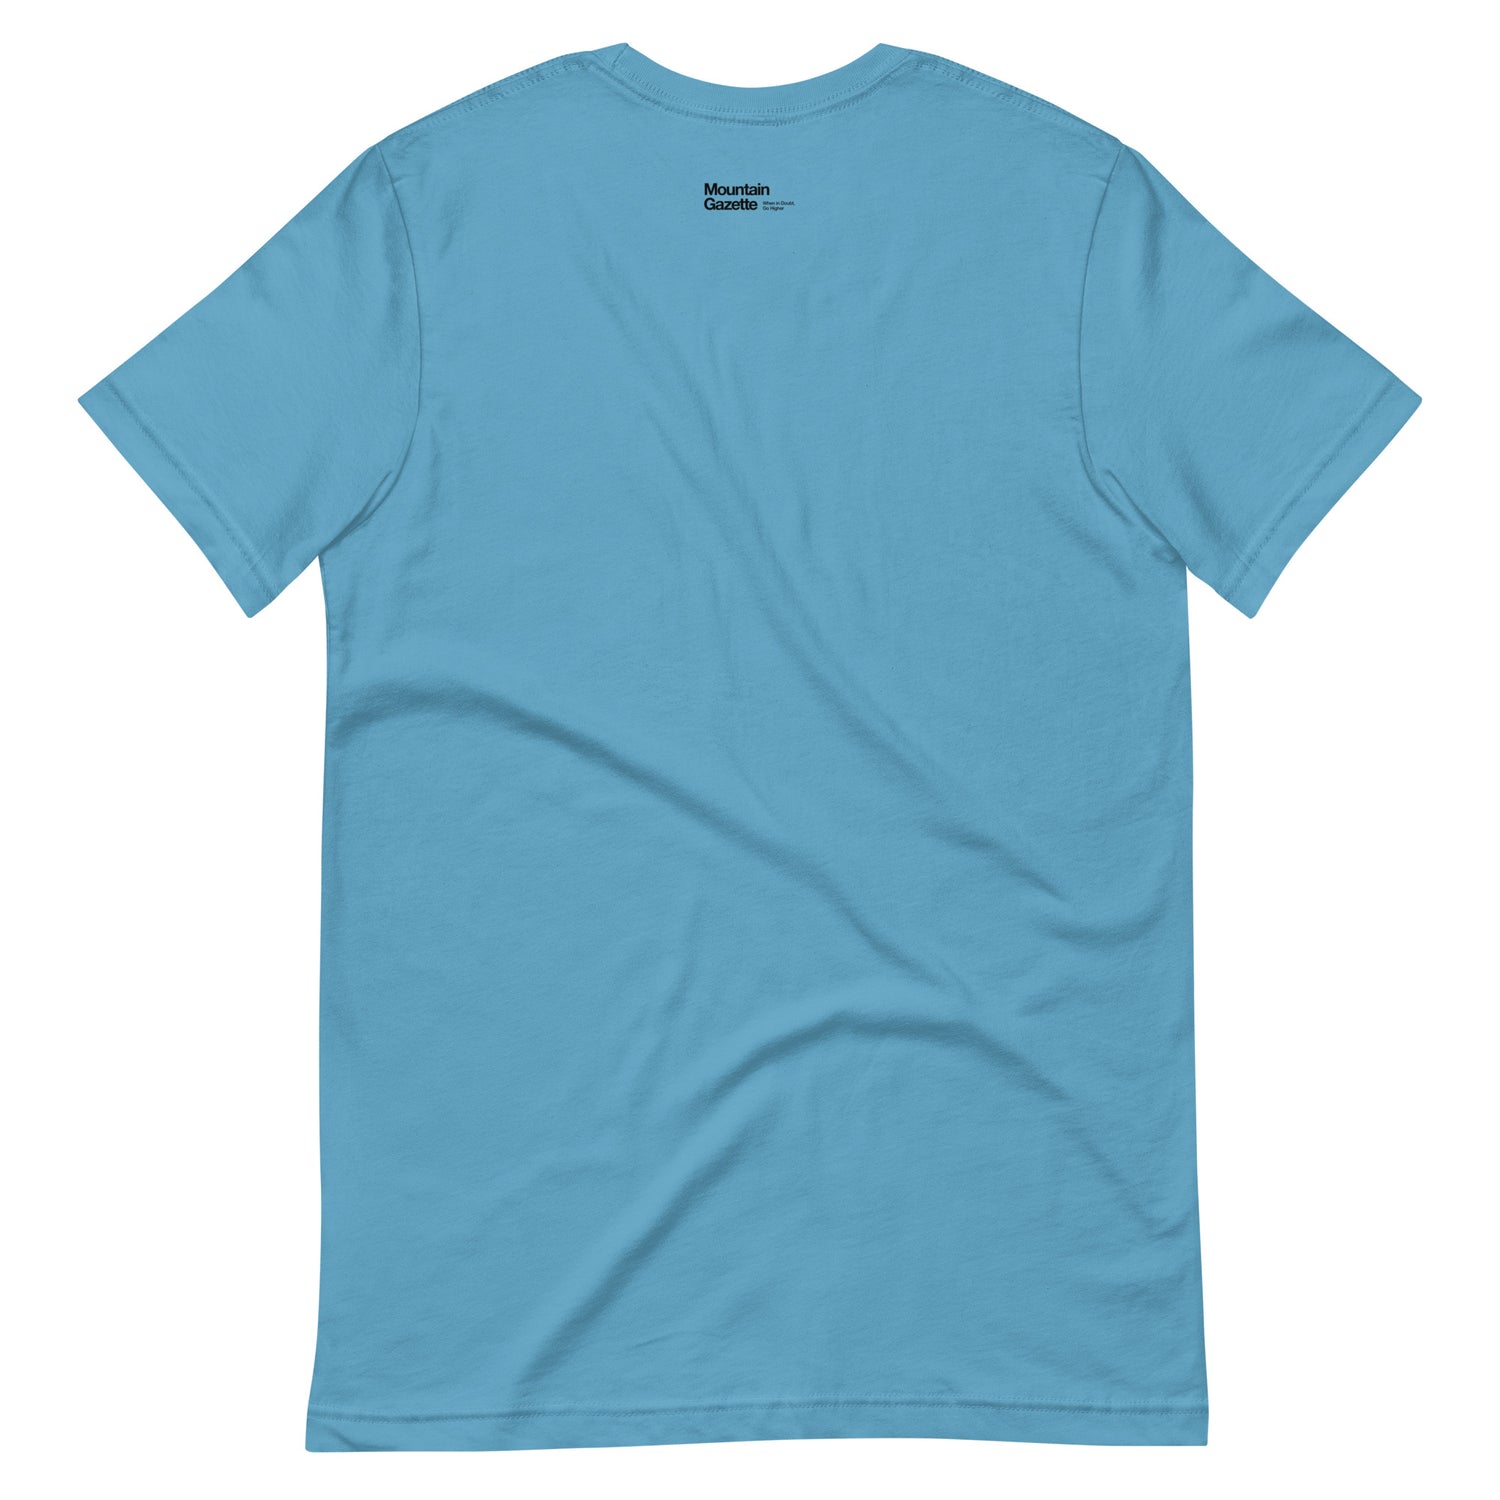 Back of Blue Unisex Short-Sleeve Cotton T-Shirt with text I Love Small Ski Areas